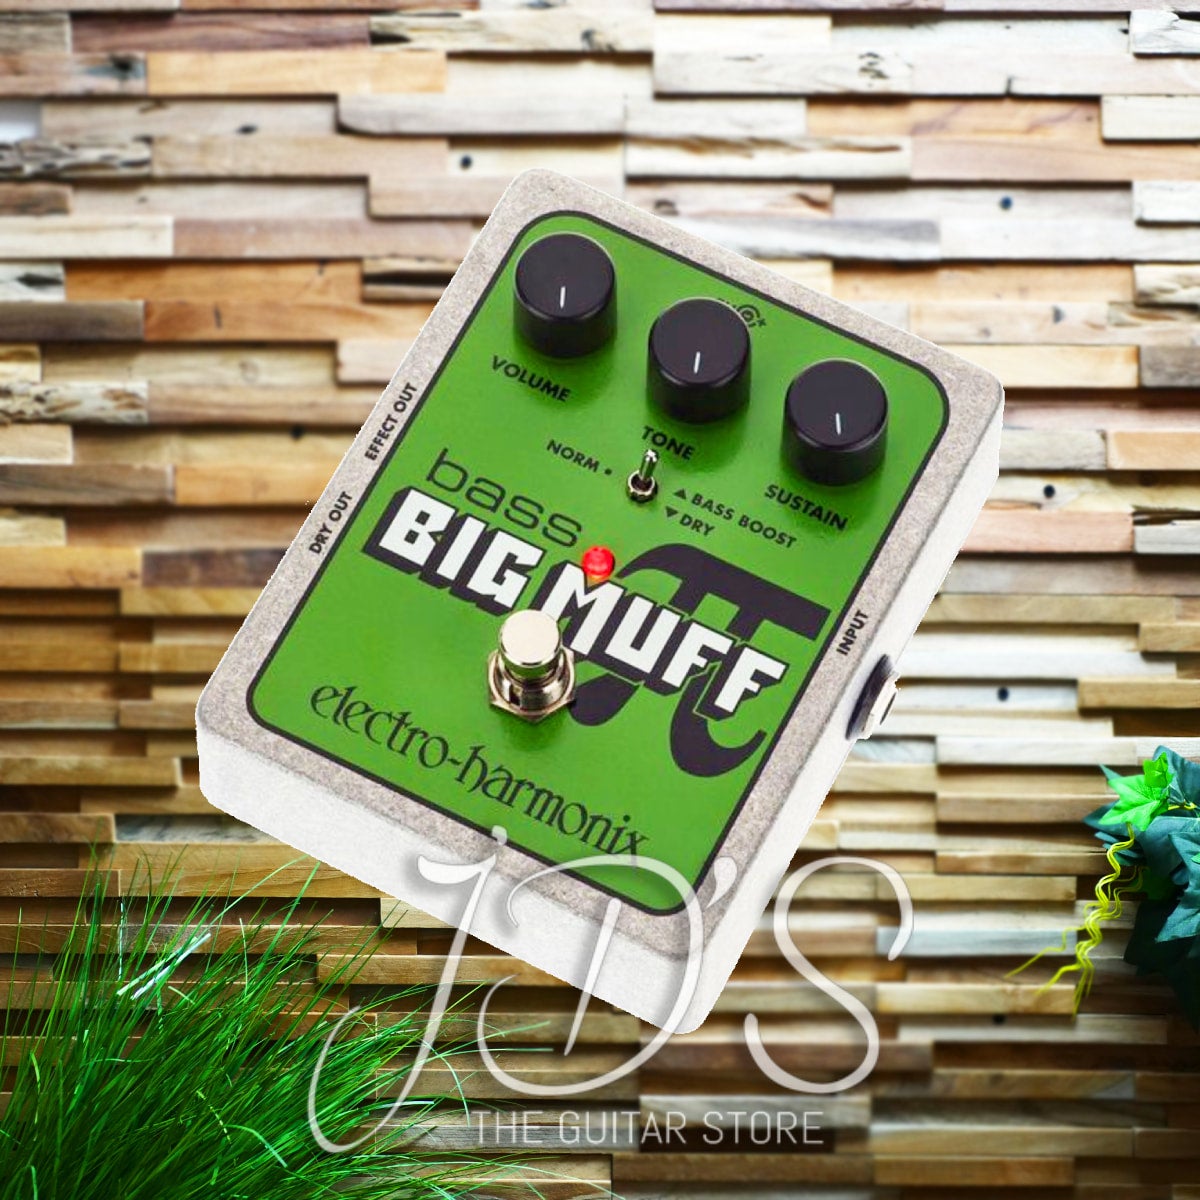 Electro-Harmonix Bass Big Muff Pi Distortion Sustainer Pedal (Nearly New)